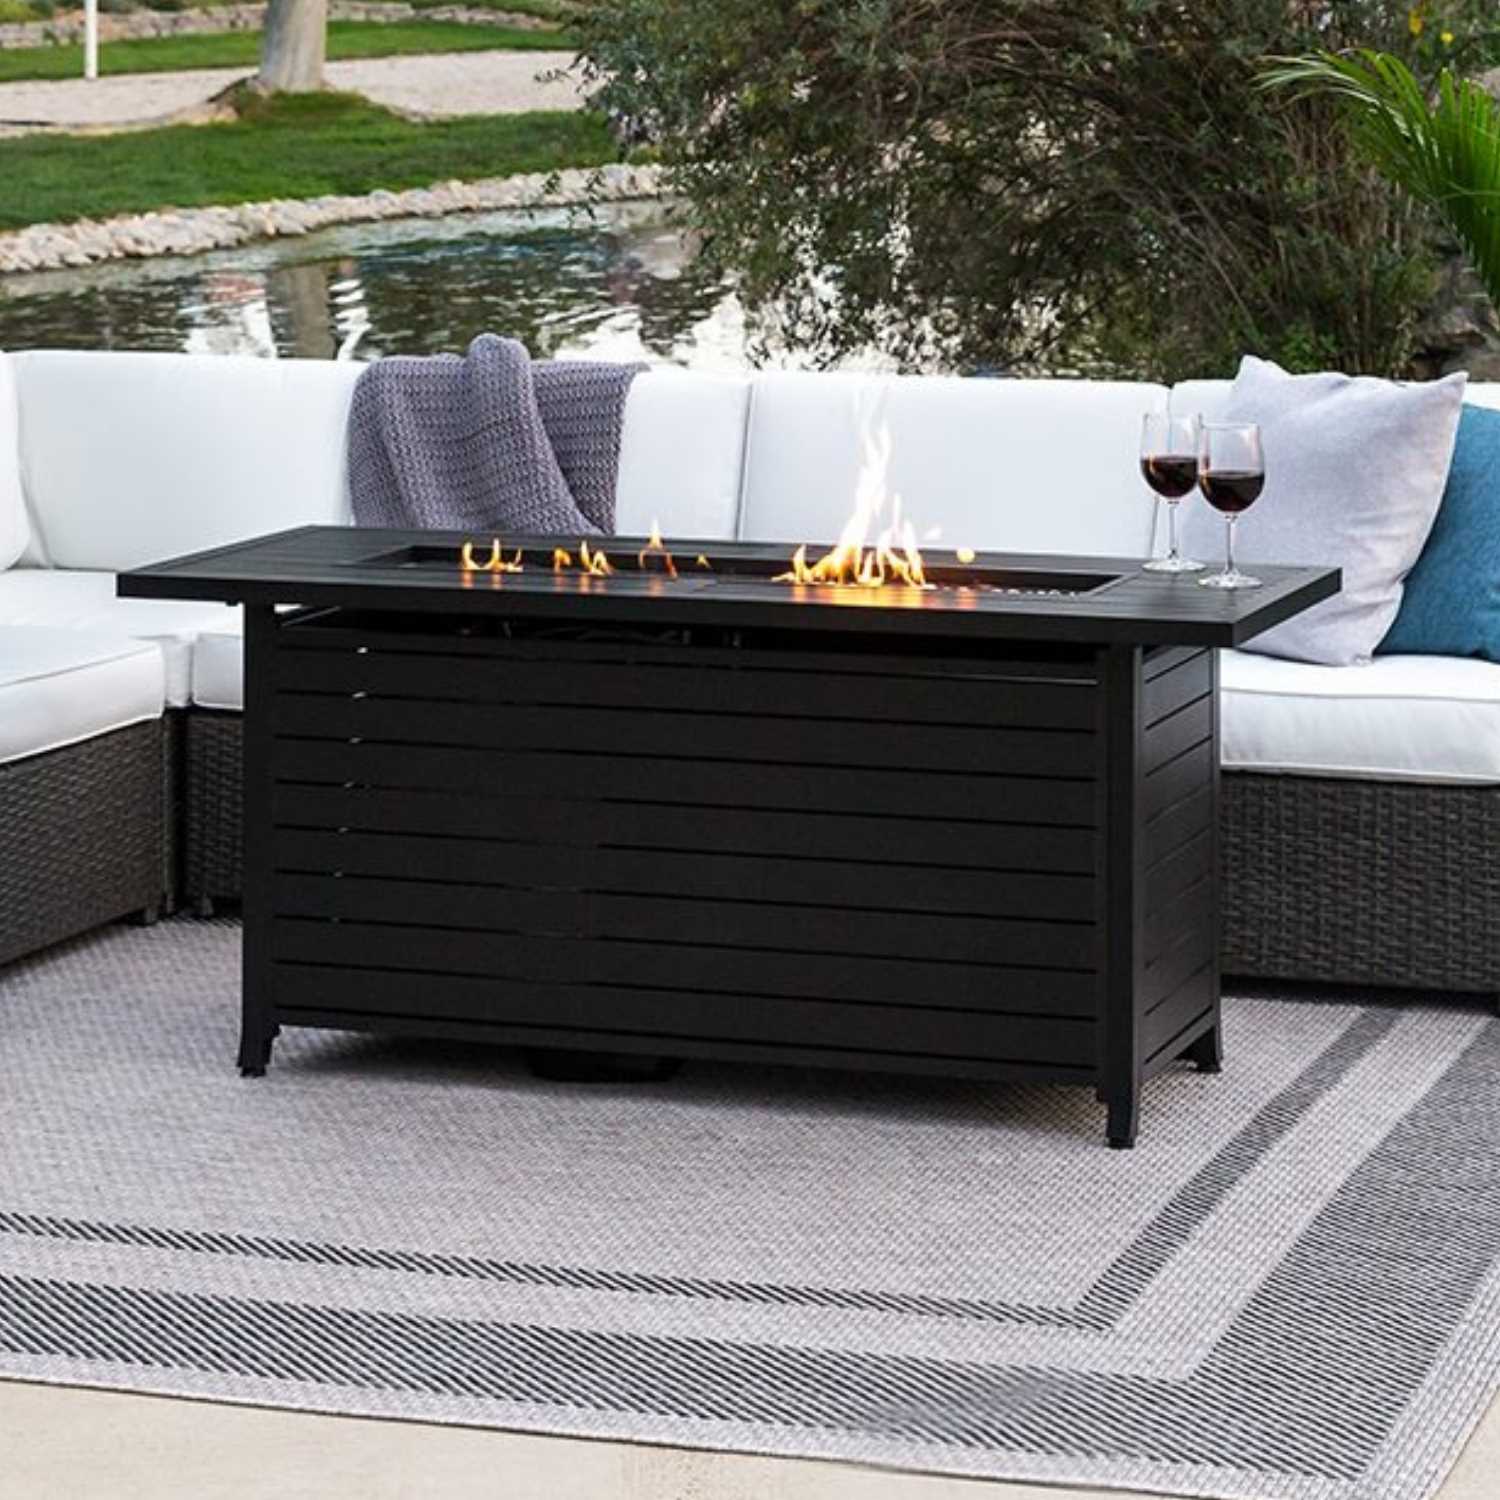 Aluminum Patio Table Glass Beads Propane Fire Pit Outdoors - Luxury Anniversary Gift Ideas For Him